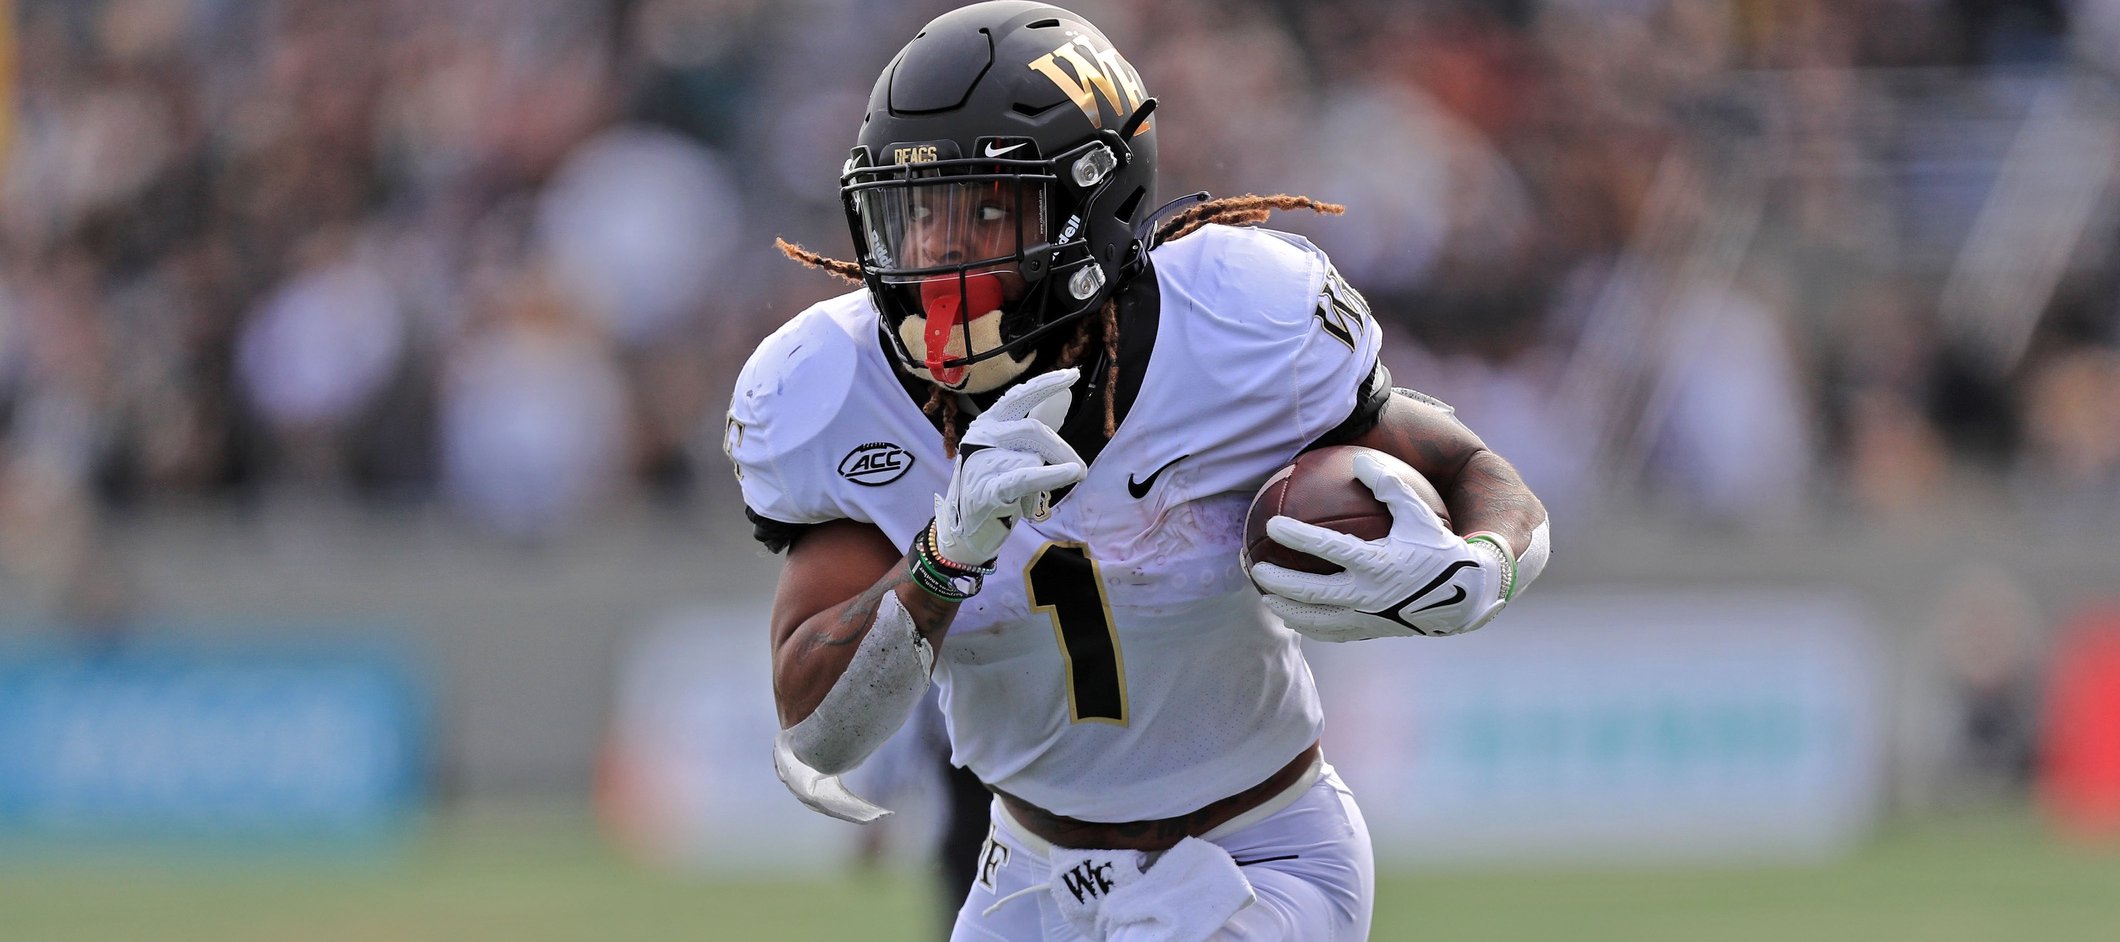 Wake Forest Demon Deacons vs NC State Wolfpack Betting in Week 10